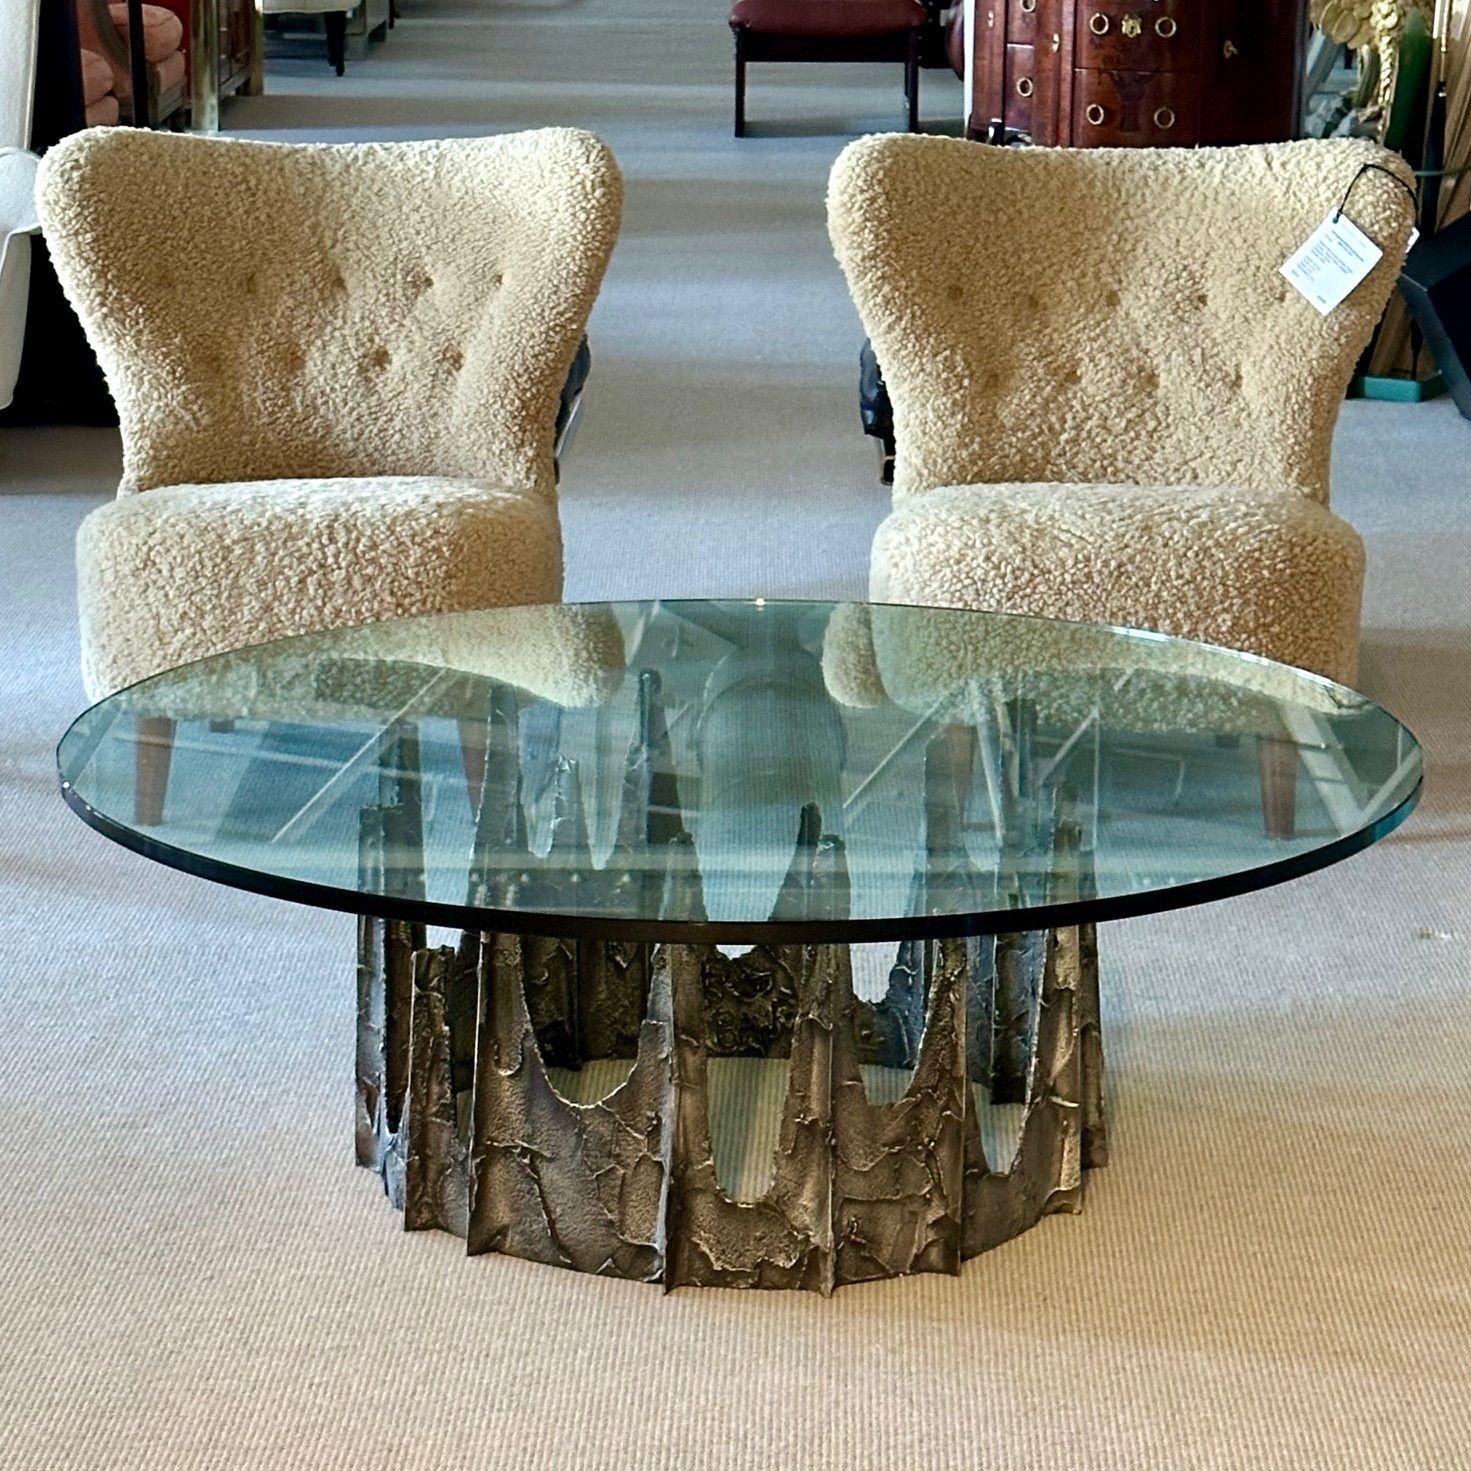 Mid-Century Modern Paul Evans Stalagmite circular coffee table, Brutalist, 1968

Early edition coffee table by Paul Evans, signed and dated PE '68, The base supports a large thick 48 inch glass table top. The base is comprised of steel with